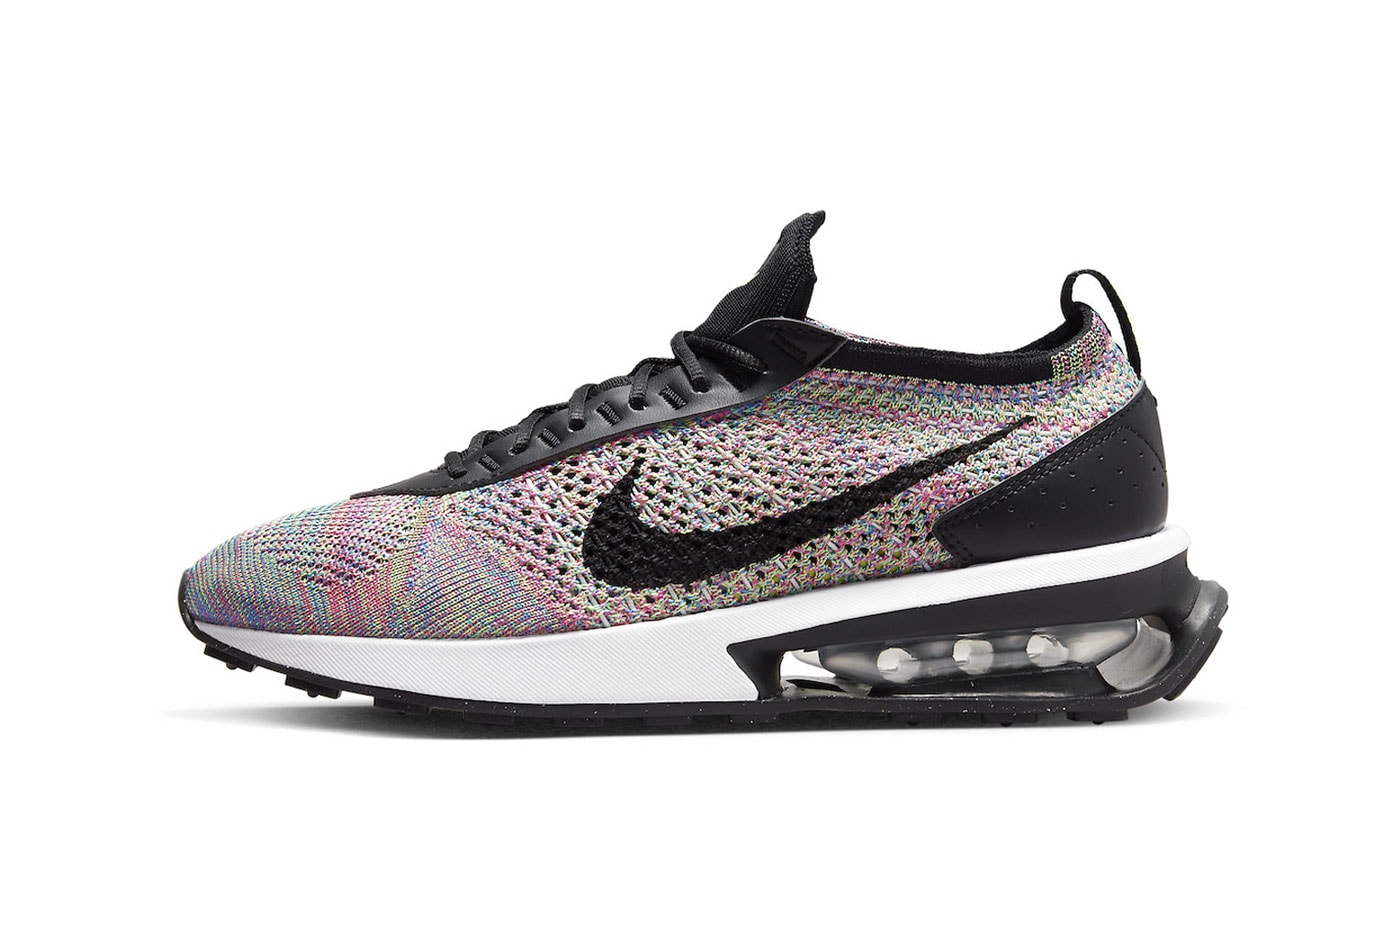 Nike air max flyknit racer multi color ghost green black pink blast photo blue pre day 2012 leather overlays release info date price